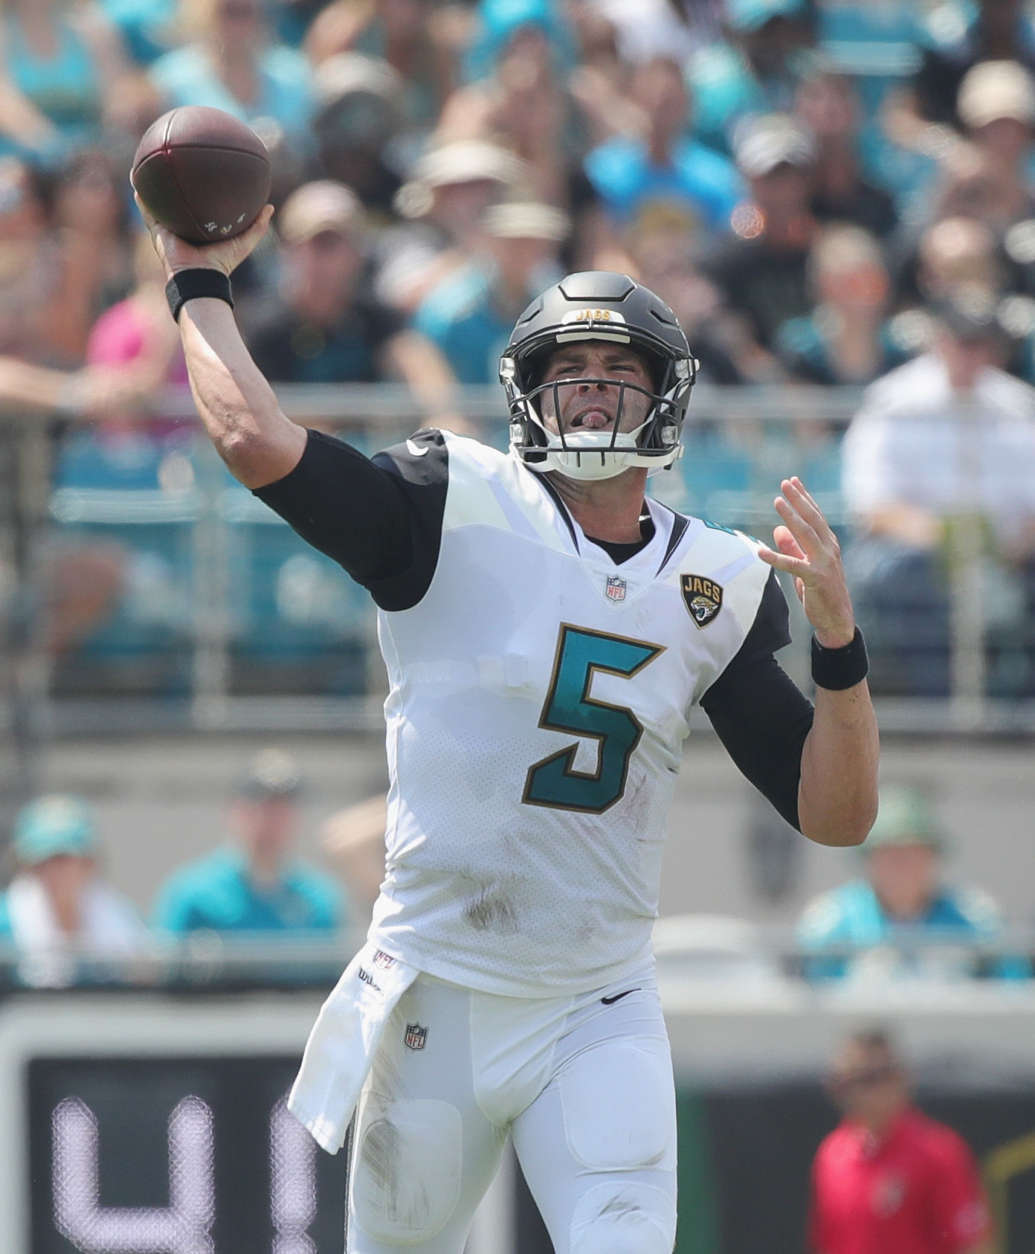 JACKSONVILLE, FL - SEPTEMBER 17:  Blake Bortles #5 of the Jacksonville Jaguars looks to pass the football during the first half of their game against the Tennessee Titans at EverBank Field on September 17, 2017 in Jacksonville, Florida.  (Photo by Logan Bowles/Getty Images)